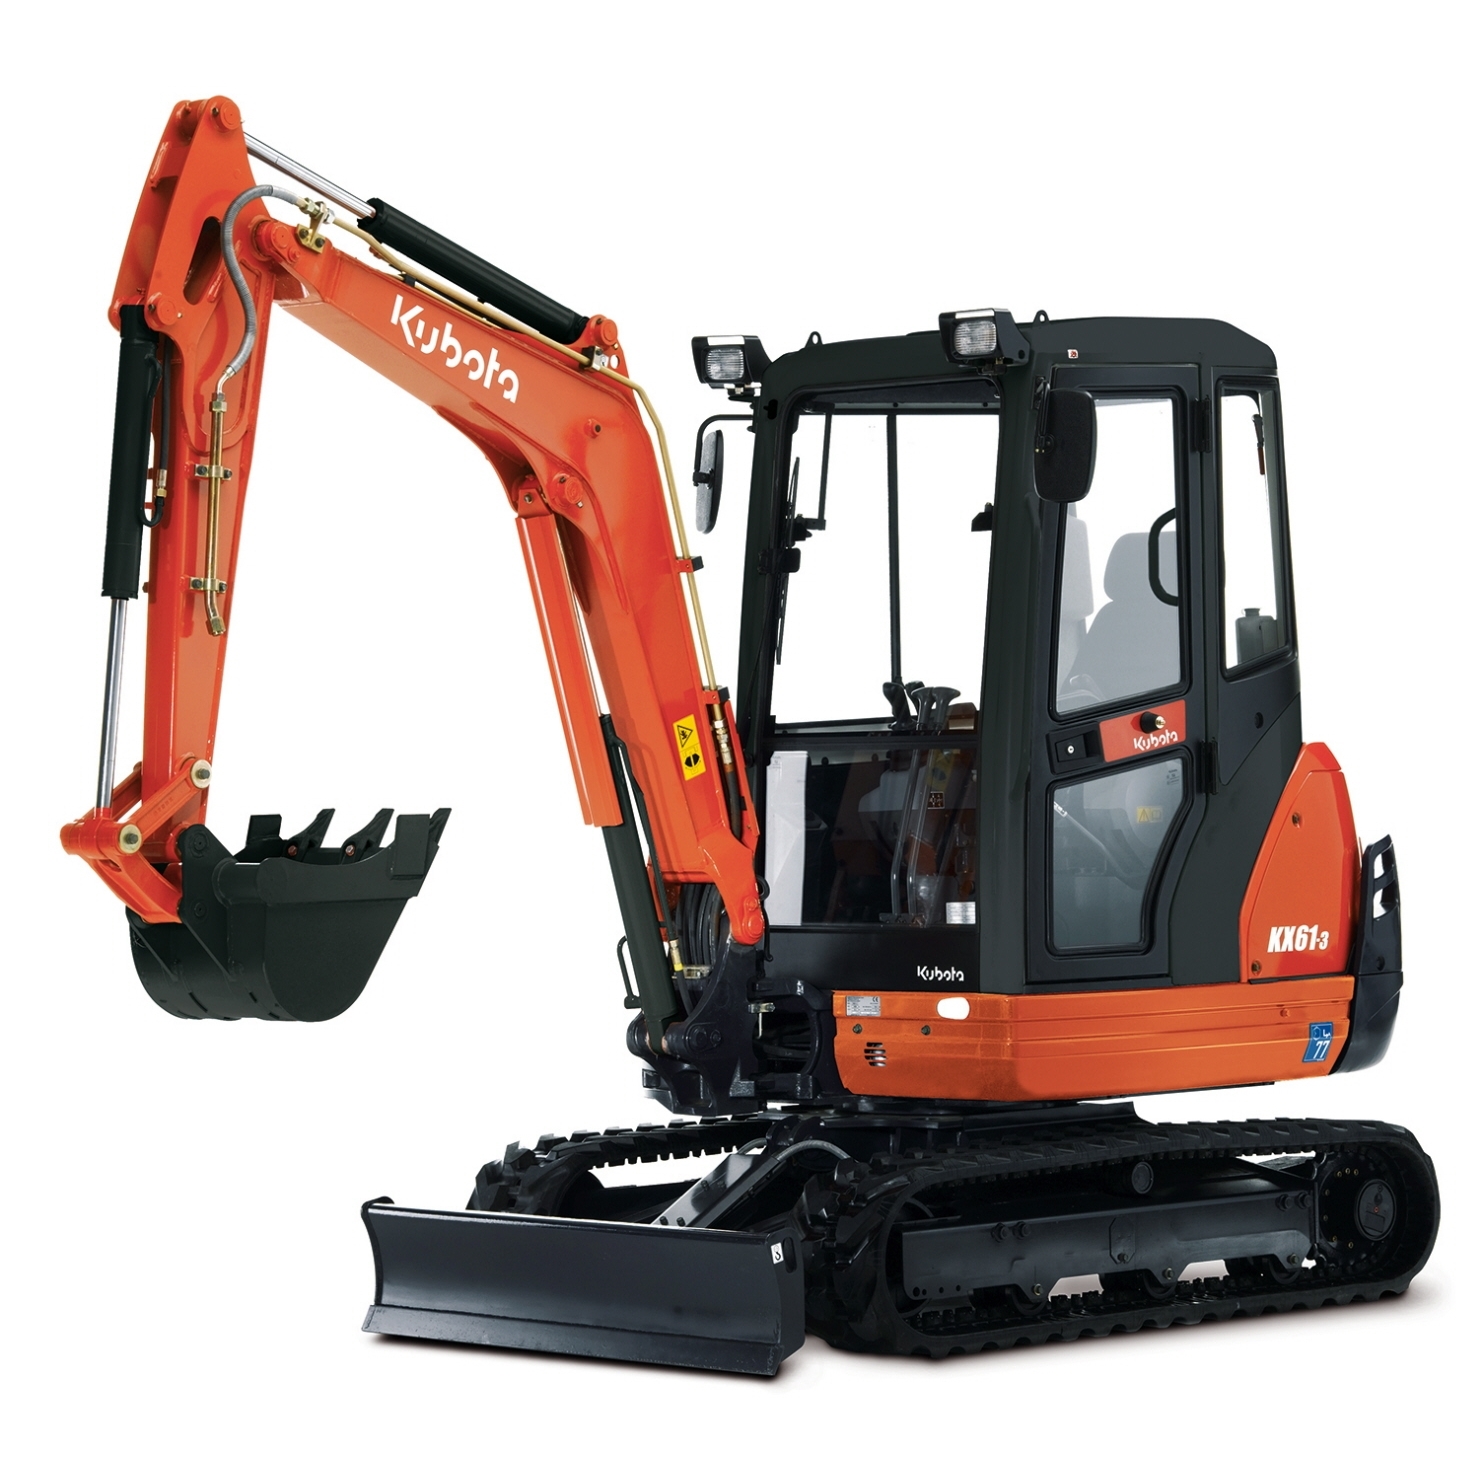 Mini Digger Hire in Slough